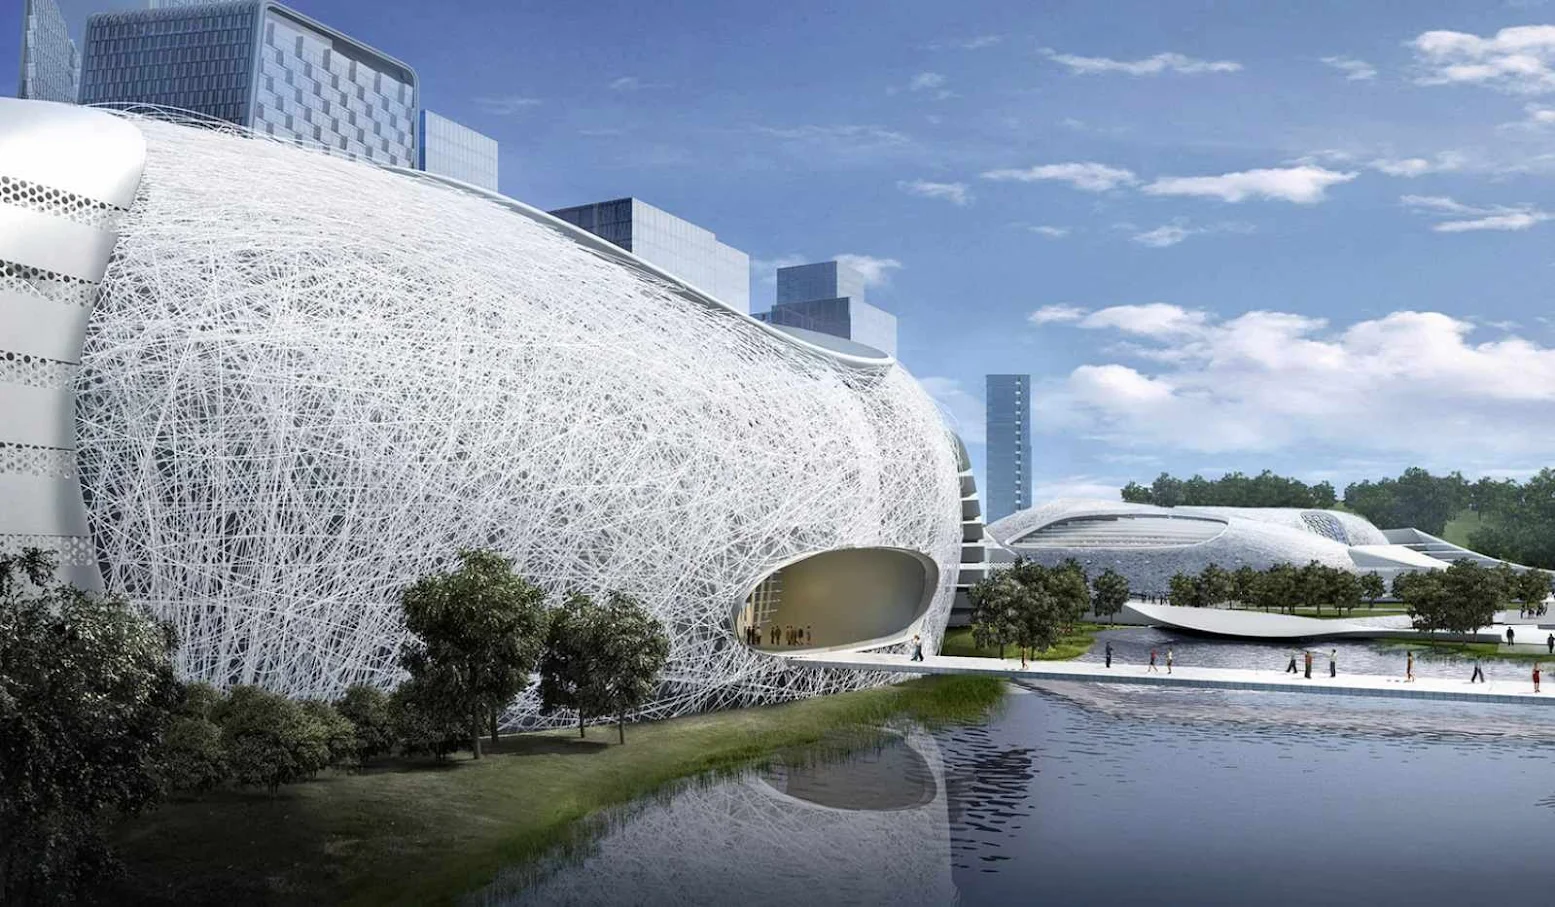 Yichang New District Master Plan by AmphibianArc